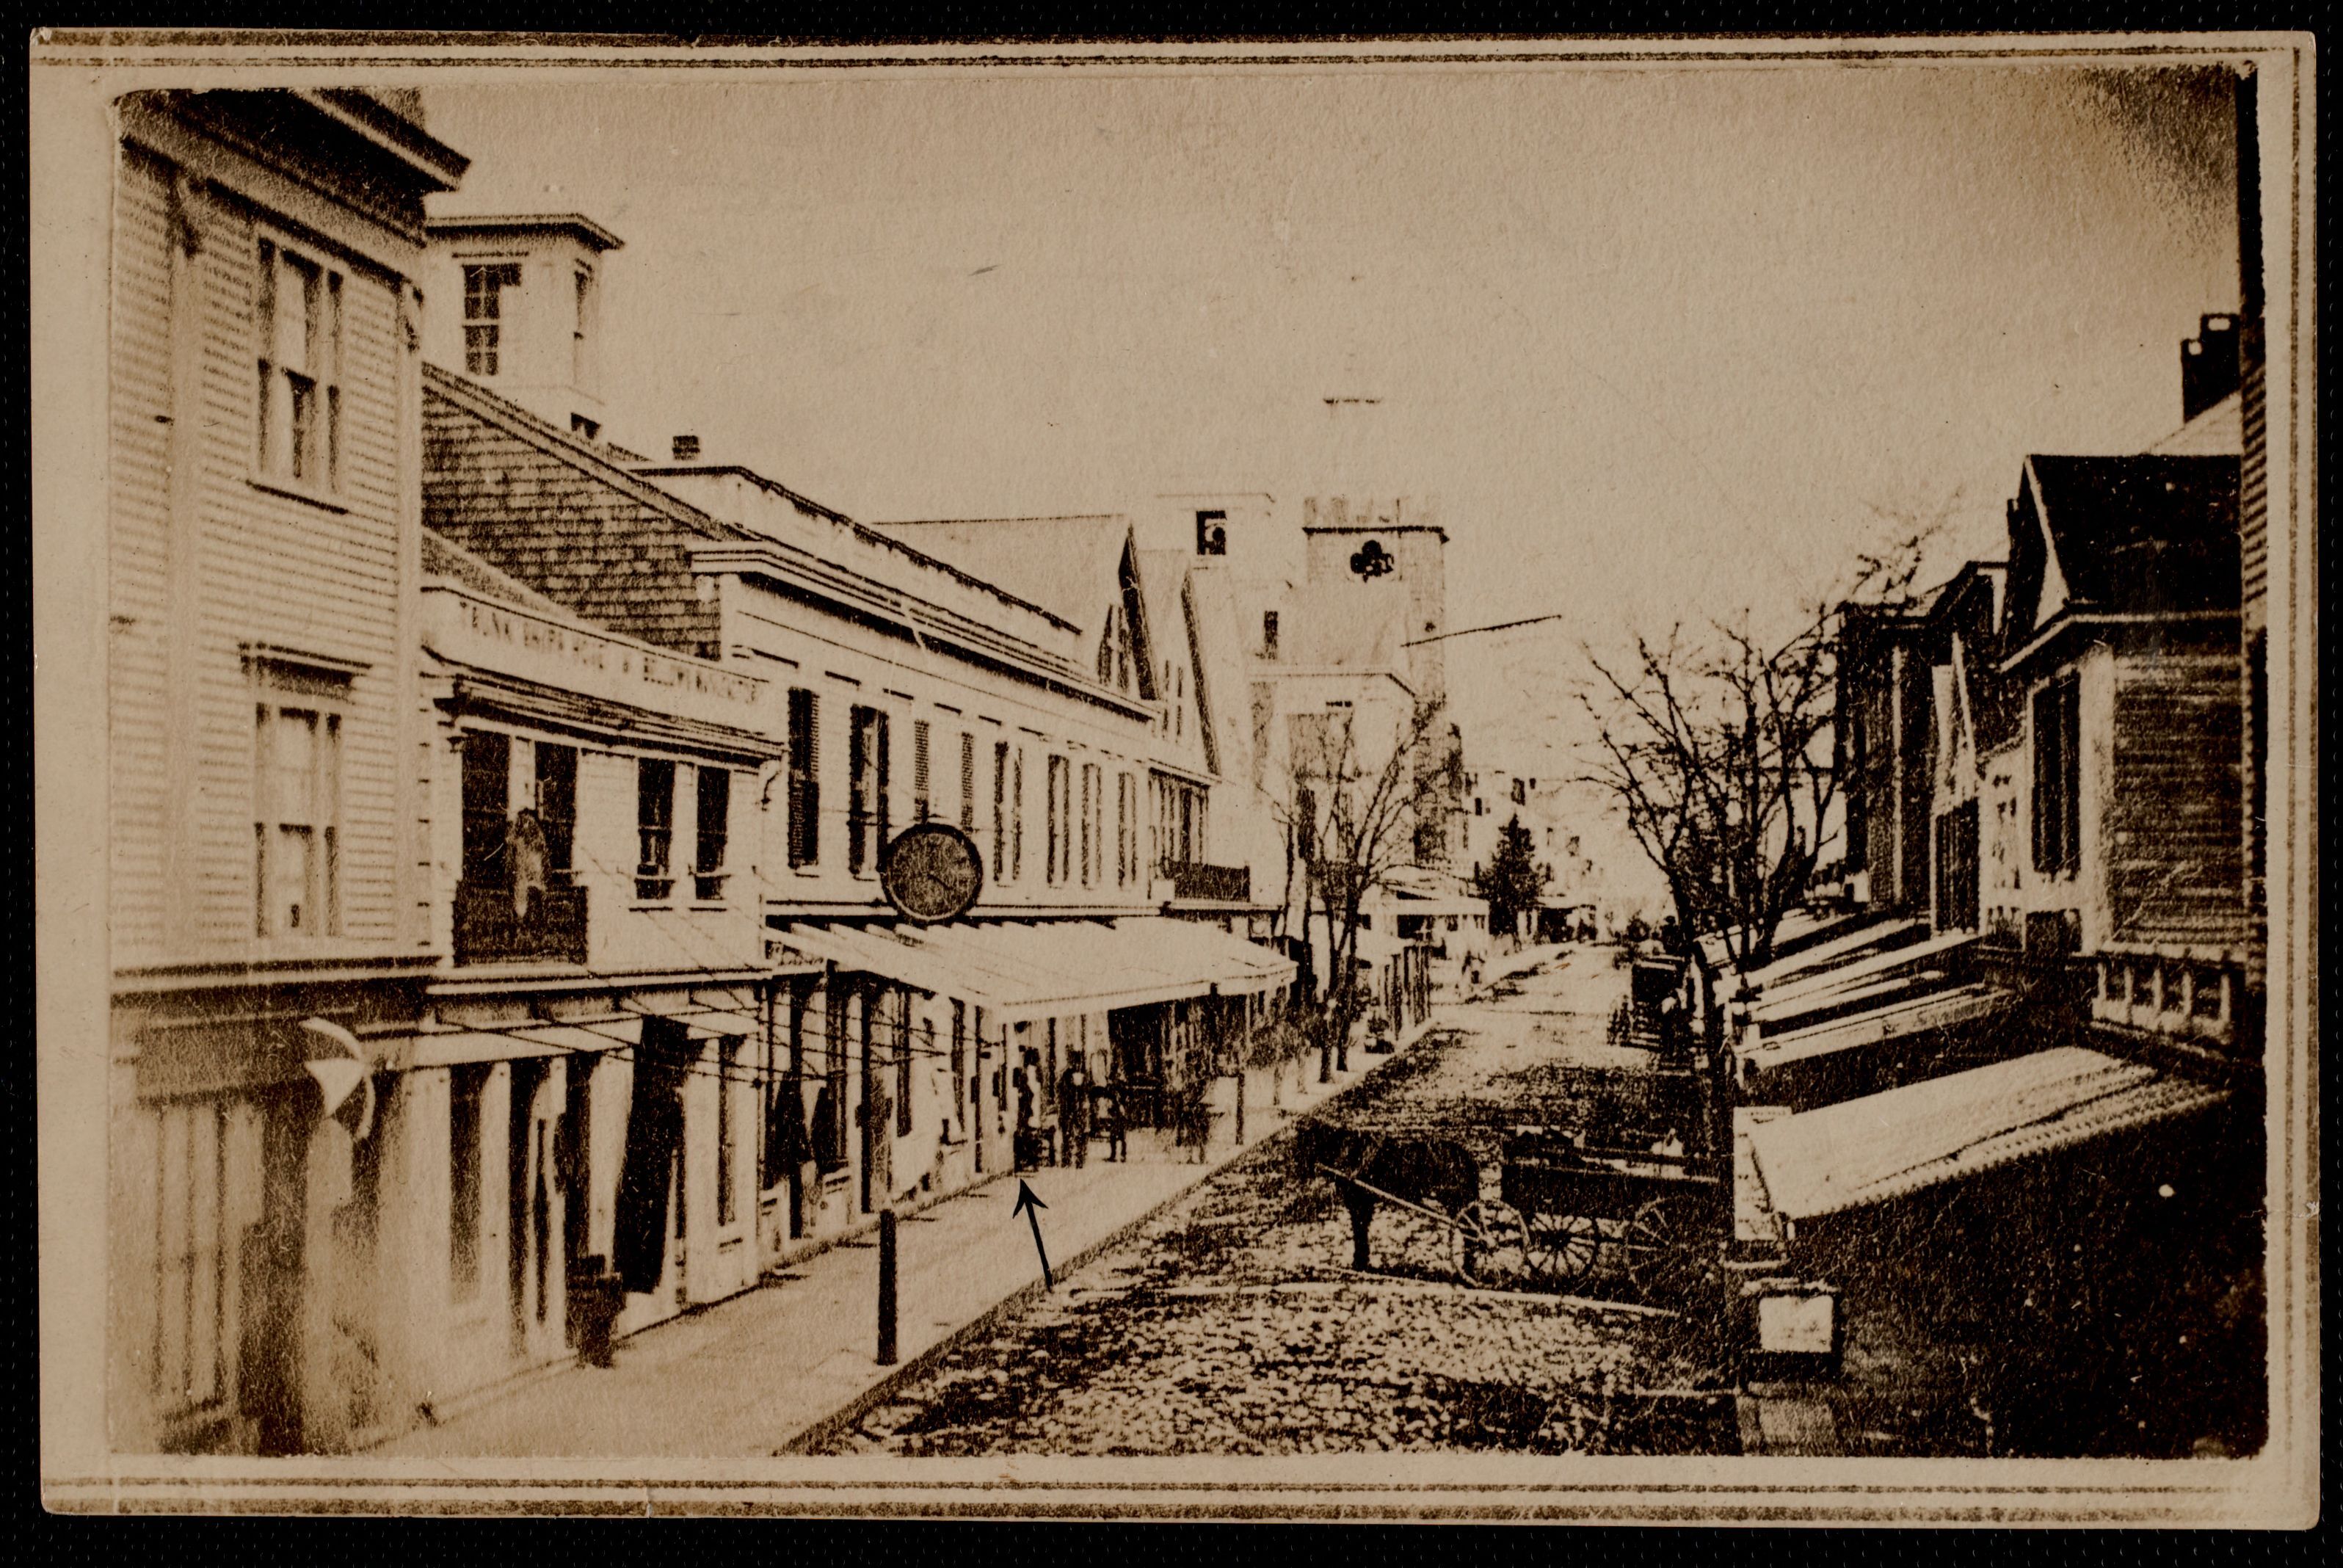 Black and white photograph of a street scene in New Bedford, Massachusetts. A cobblestone street runs through the middle with buildings on either side and pedestrians and horse drawn carriages on the sidewalk and street.